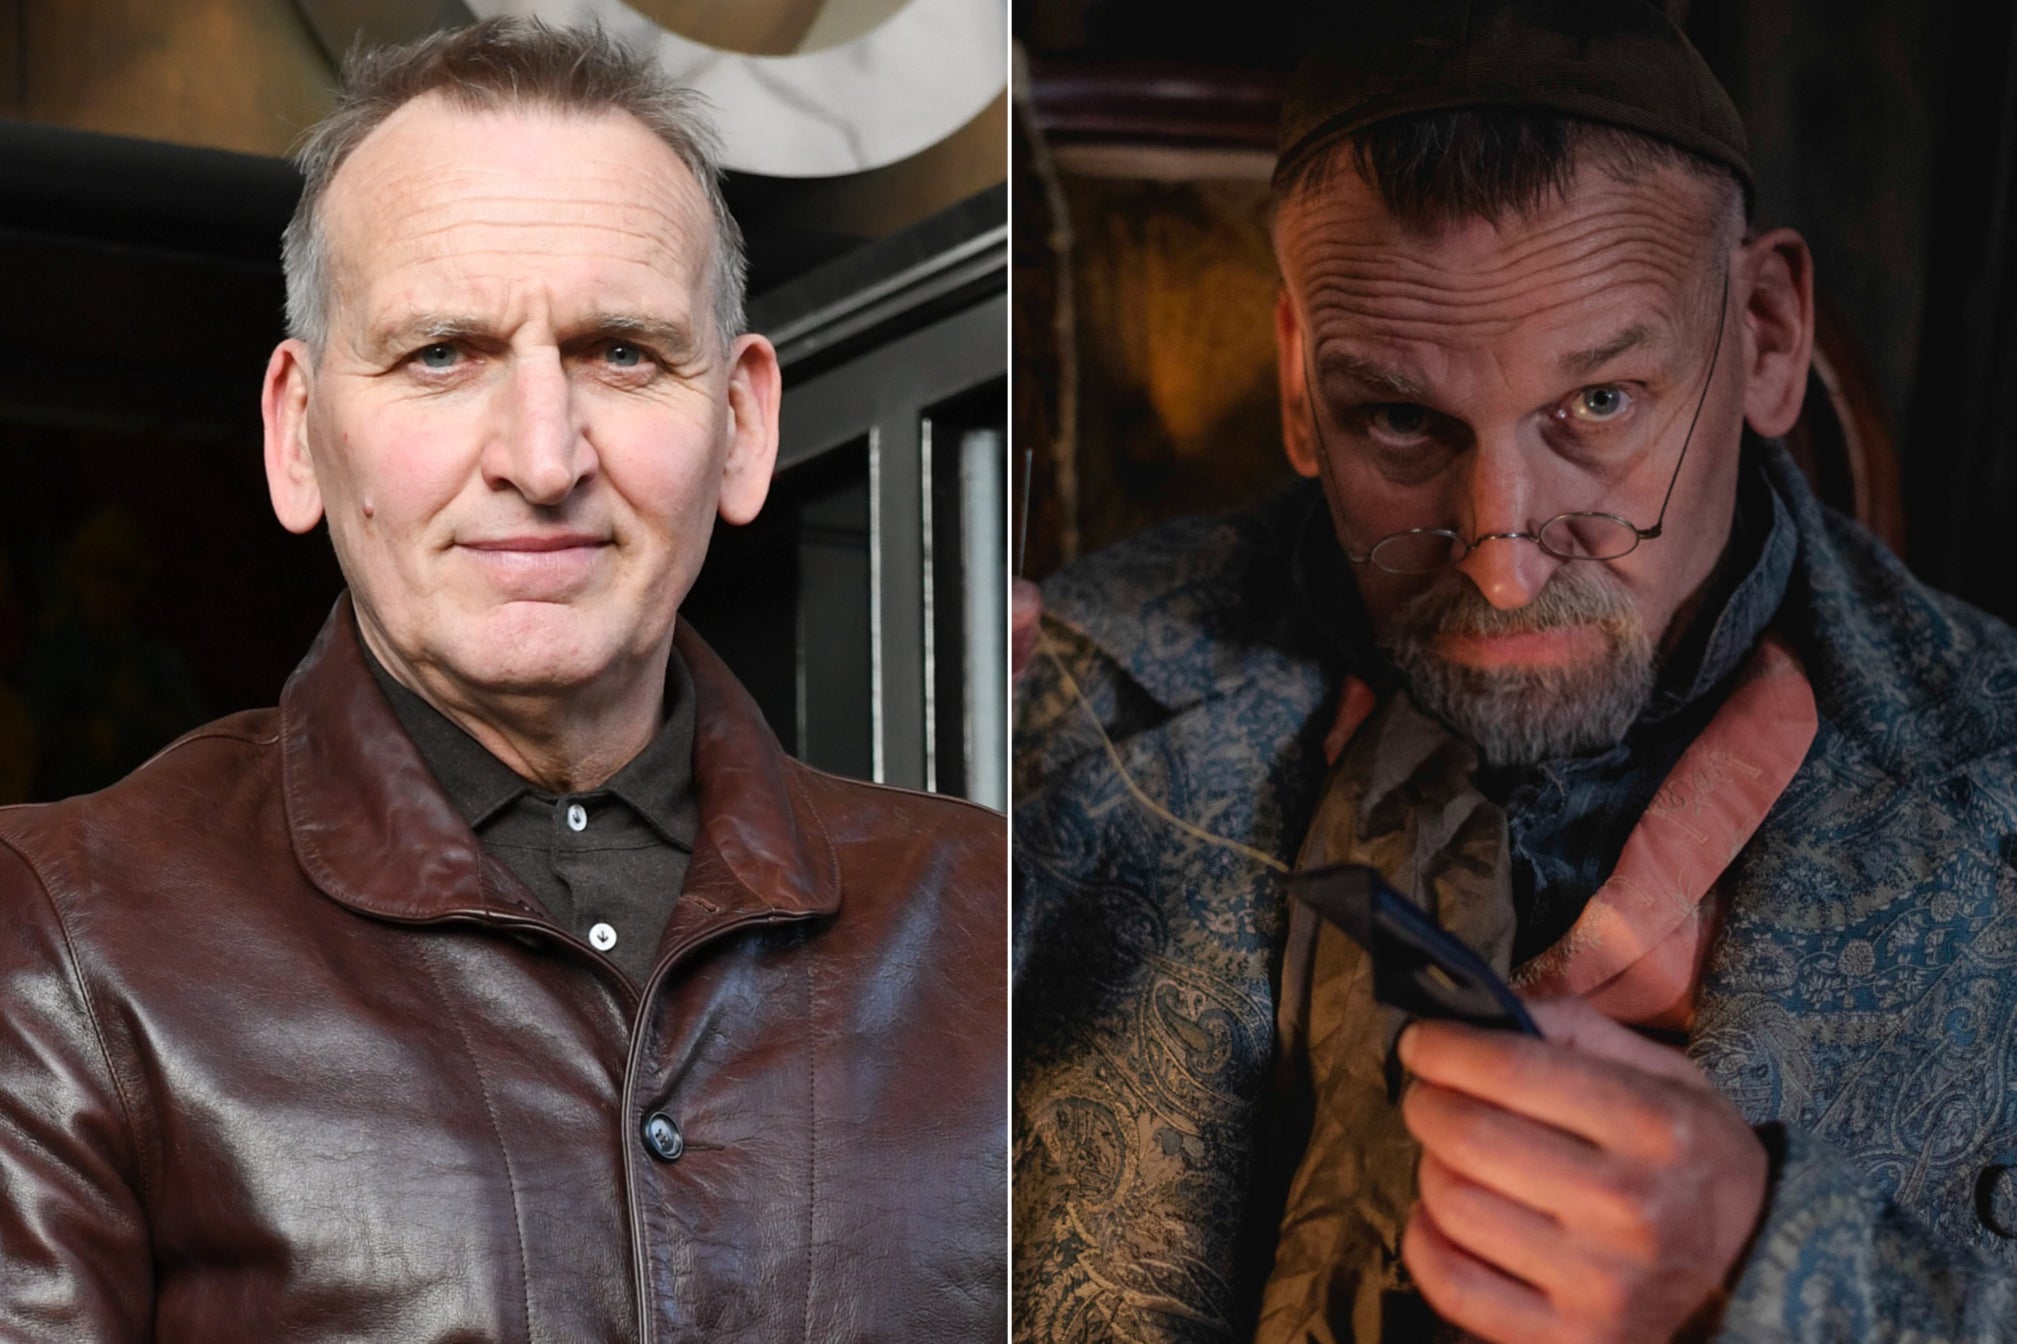 ‘Doctor Who’ star plays Dickens’s villain in CBBC spin-off show